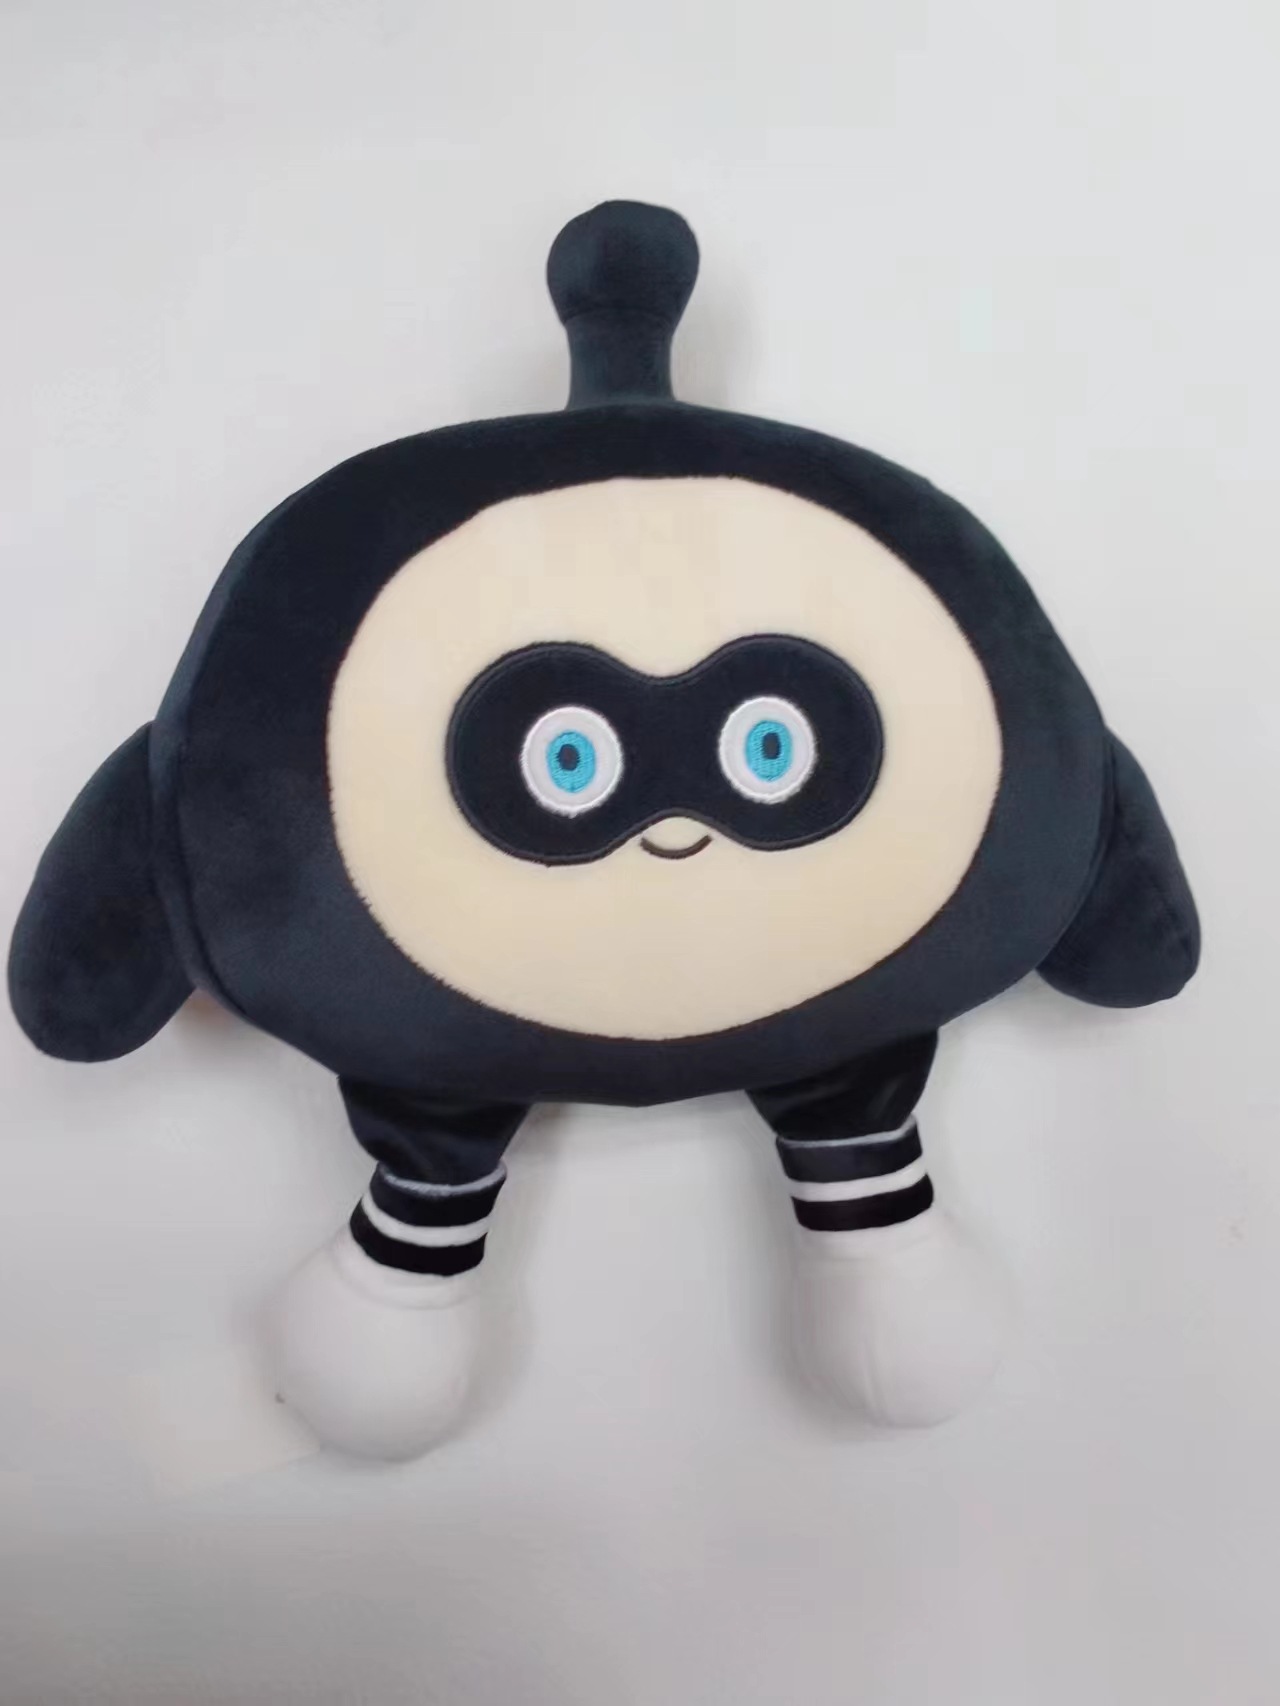 Egg Puff Doll Plush Toy Hand-Made Egg Dealer Doll Labor Reform Black Egg Doll Peripheral Pillow Party Gift